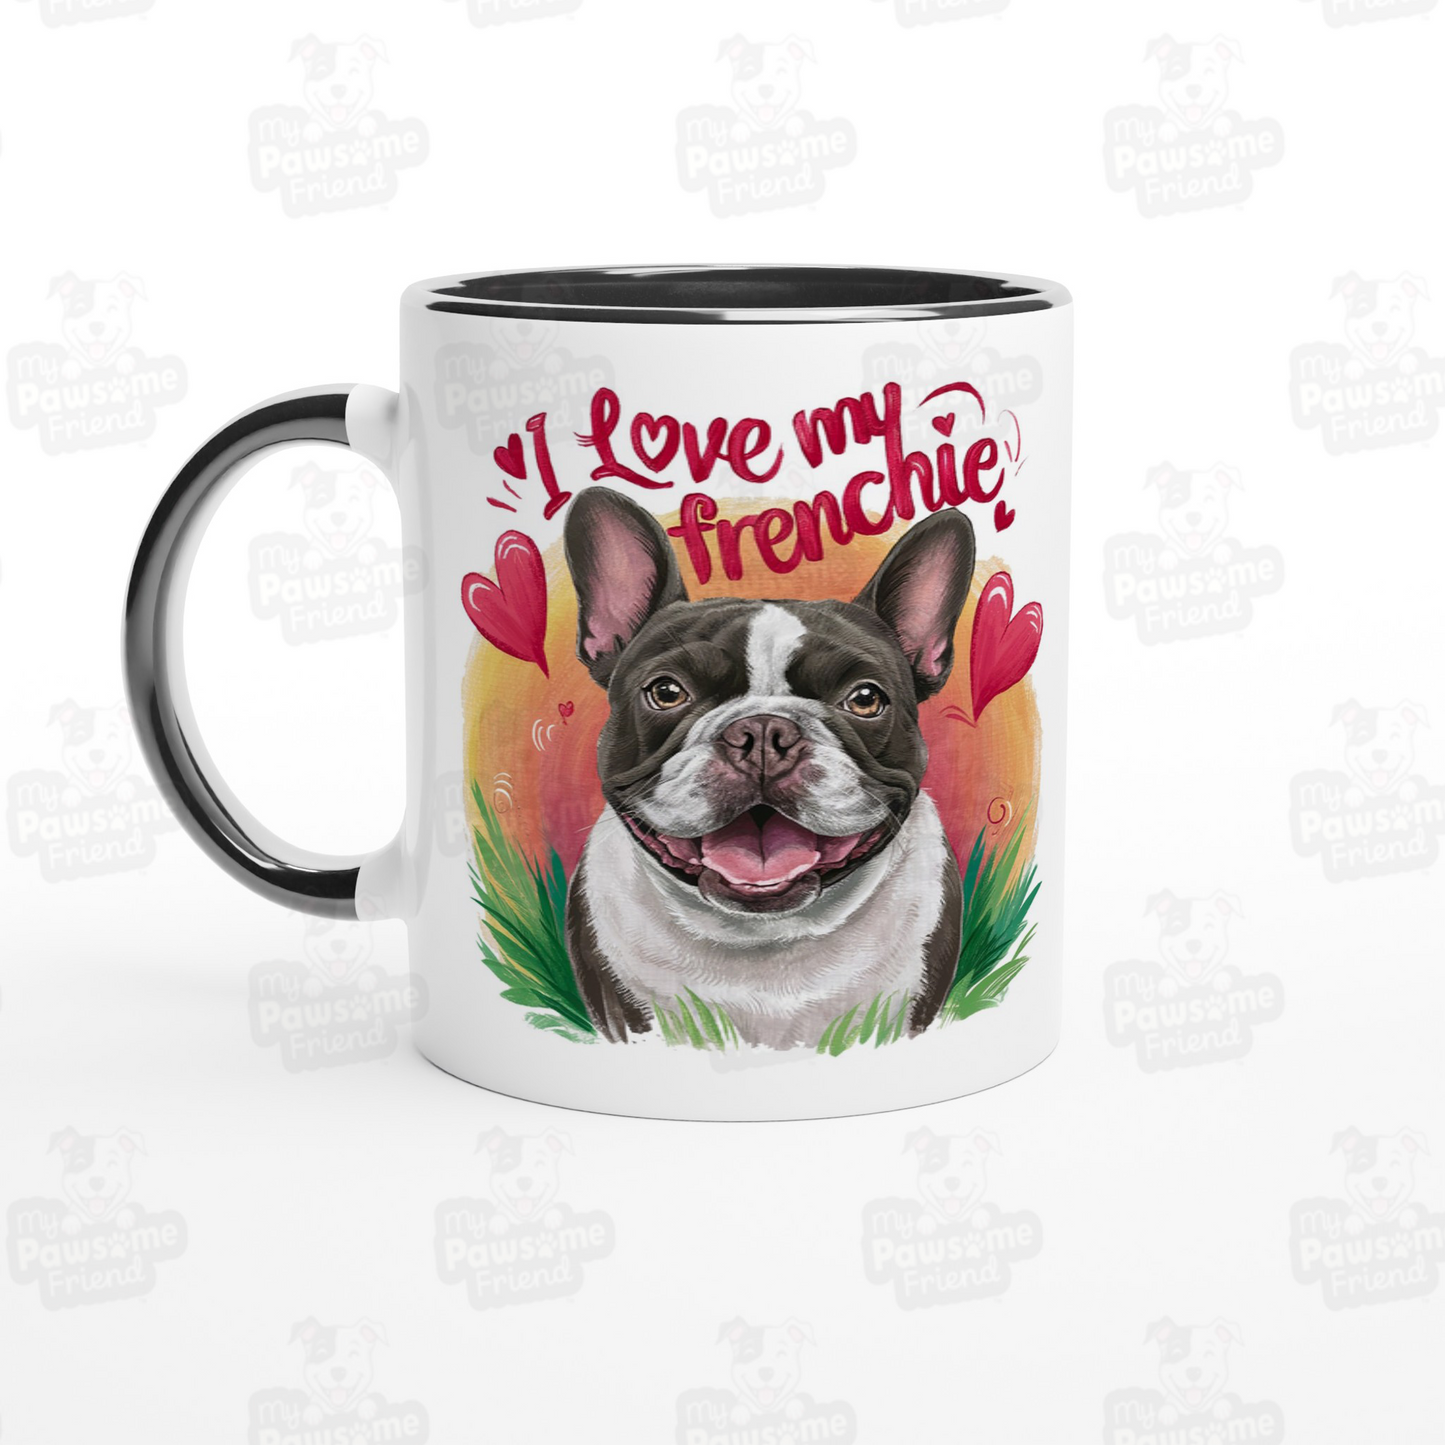 A coffee mug with a cute design featuring a french bulldog smiling surrounded by heart designs, and the phrase "I love my Frenchie". The handle color of the coffee mug is black